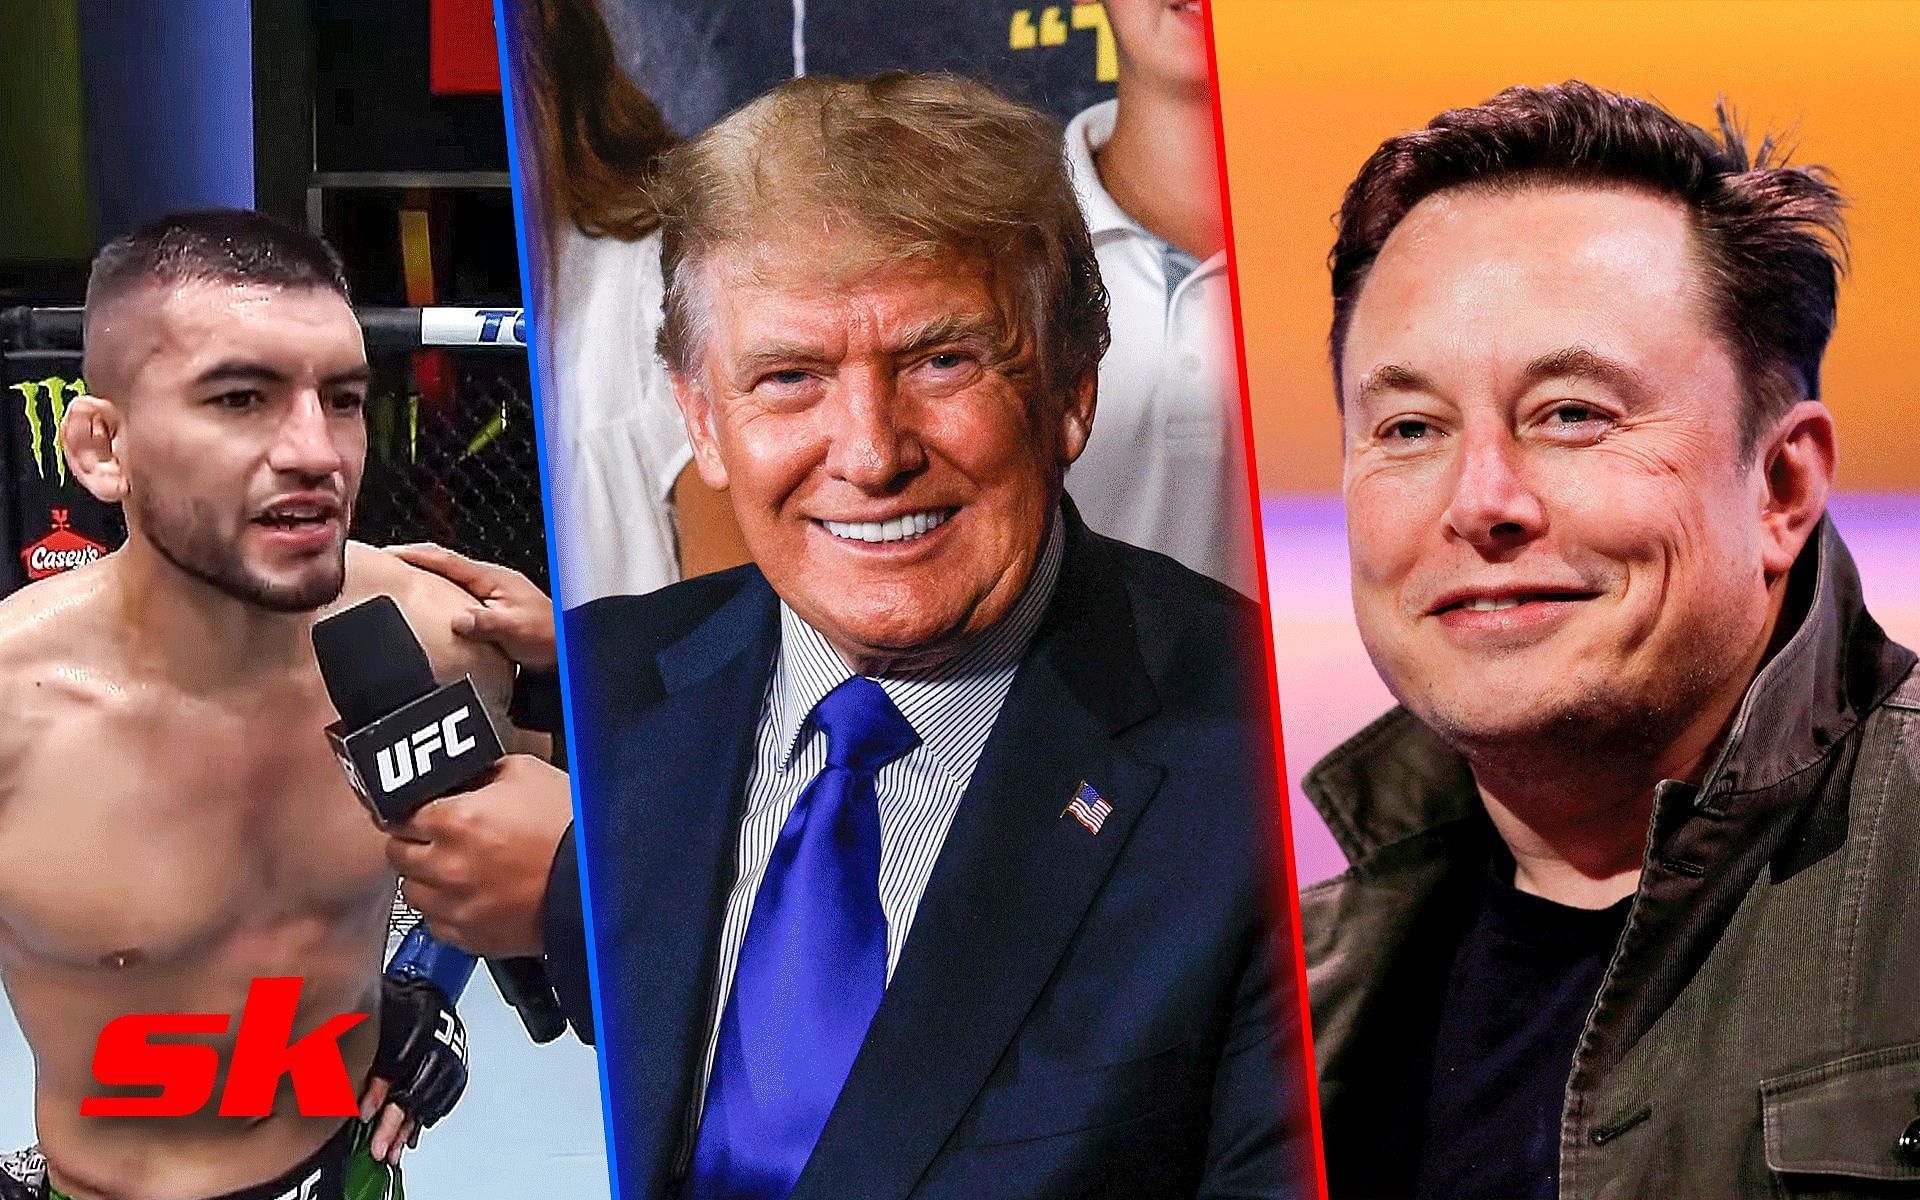 Johnny Munhoz (Left), Donald Trump (Middle), Elon Musk (Right) [Image courtesy: @UFC on YouTube, Getty, reuters.com]